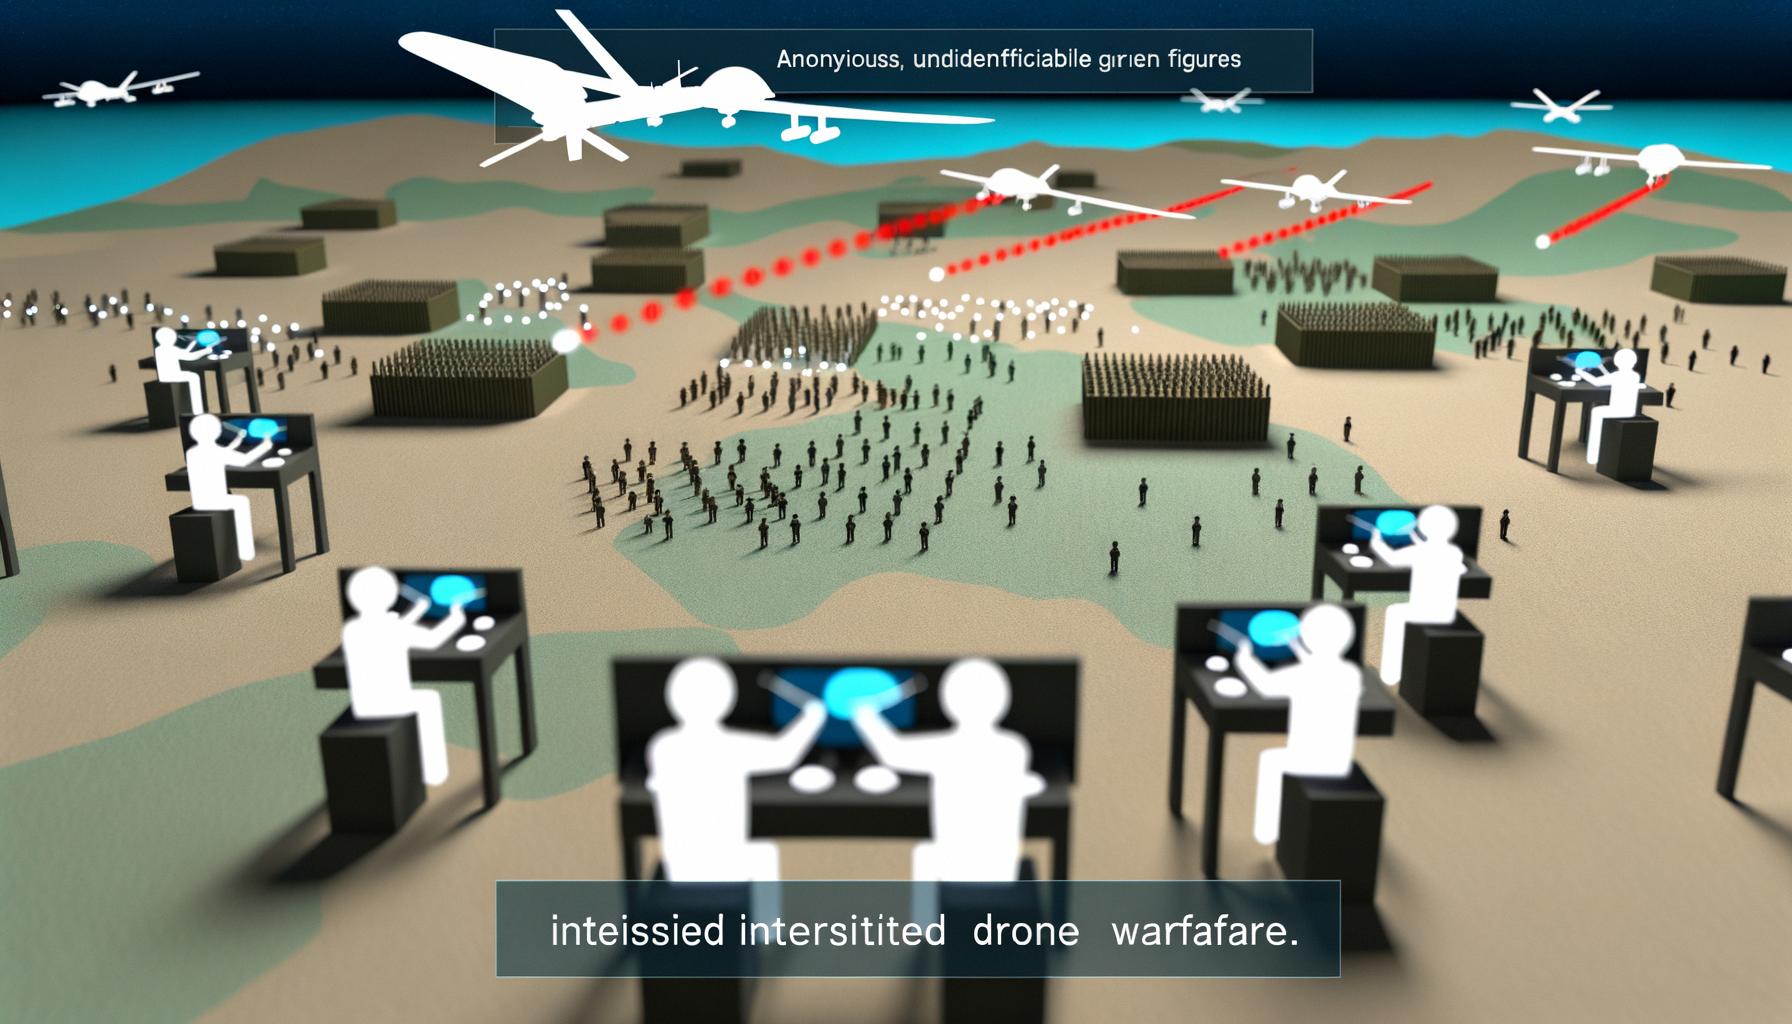 Drone warfare has significantly escalated the Ukraine-Russia conflict.